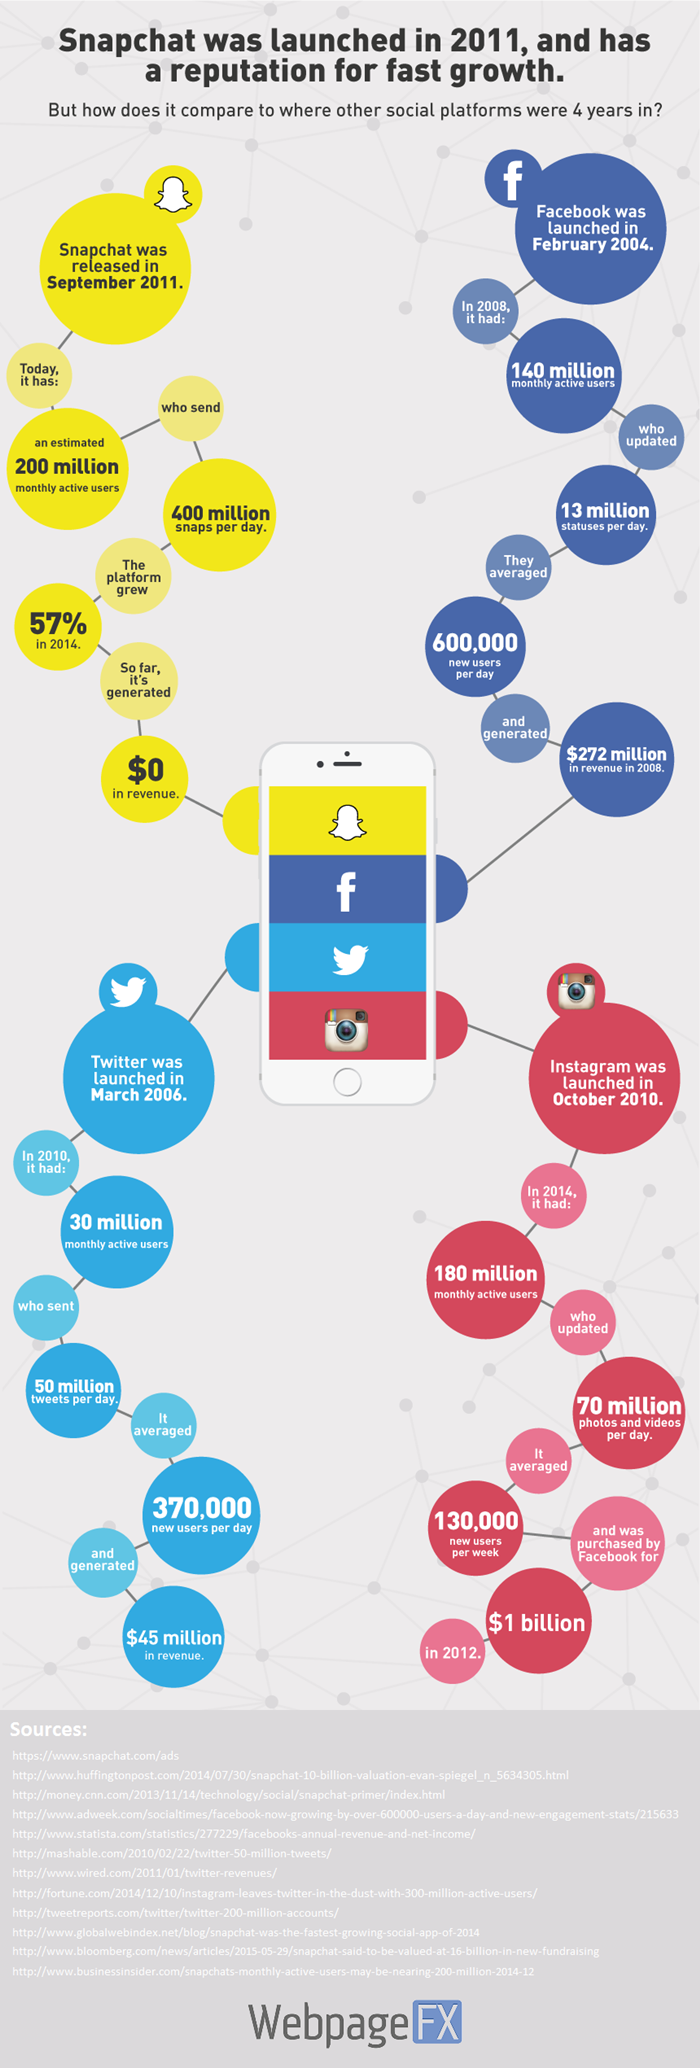 snapchat-growth-infographic-higlight-700